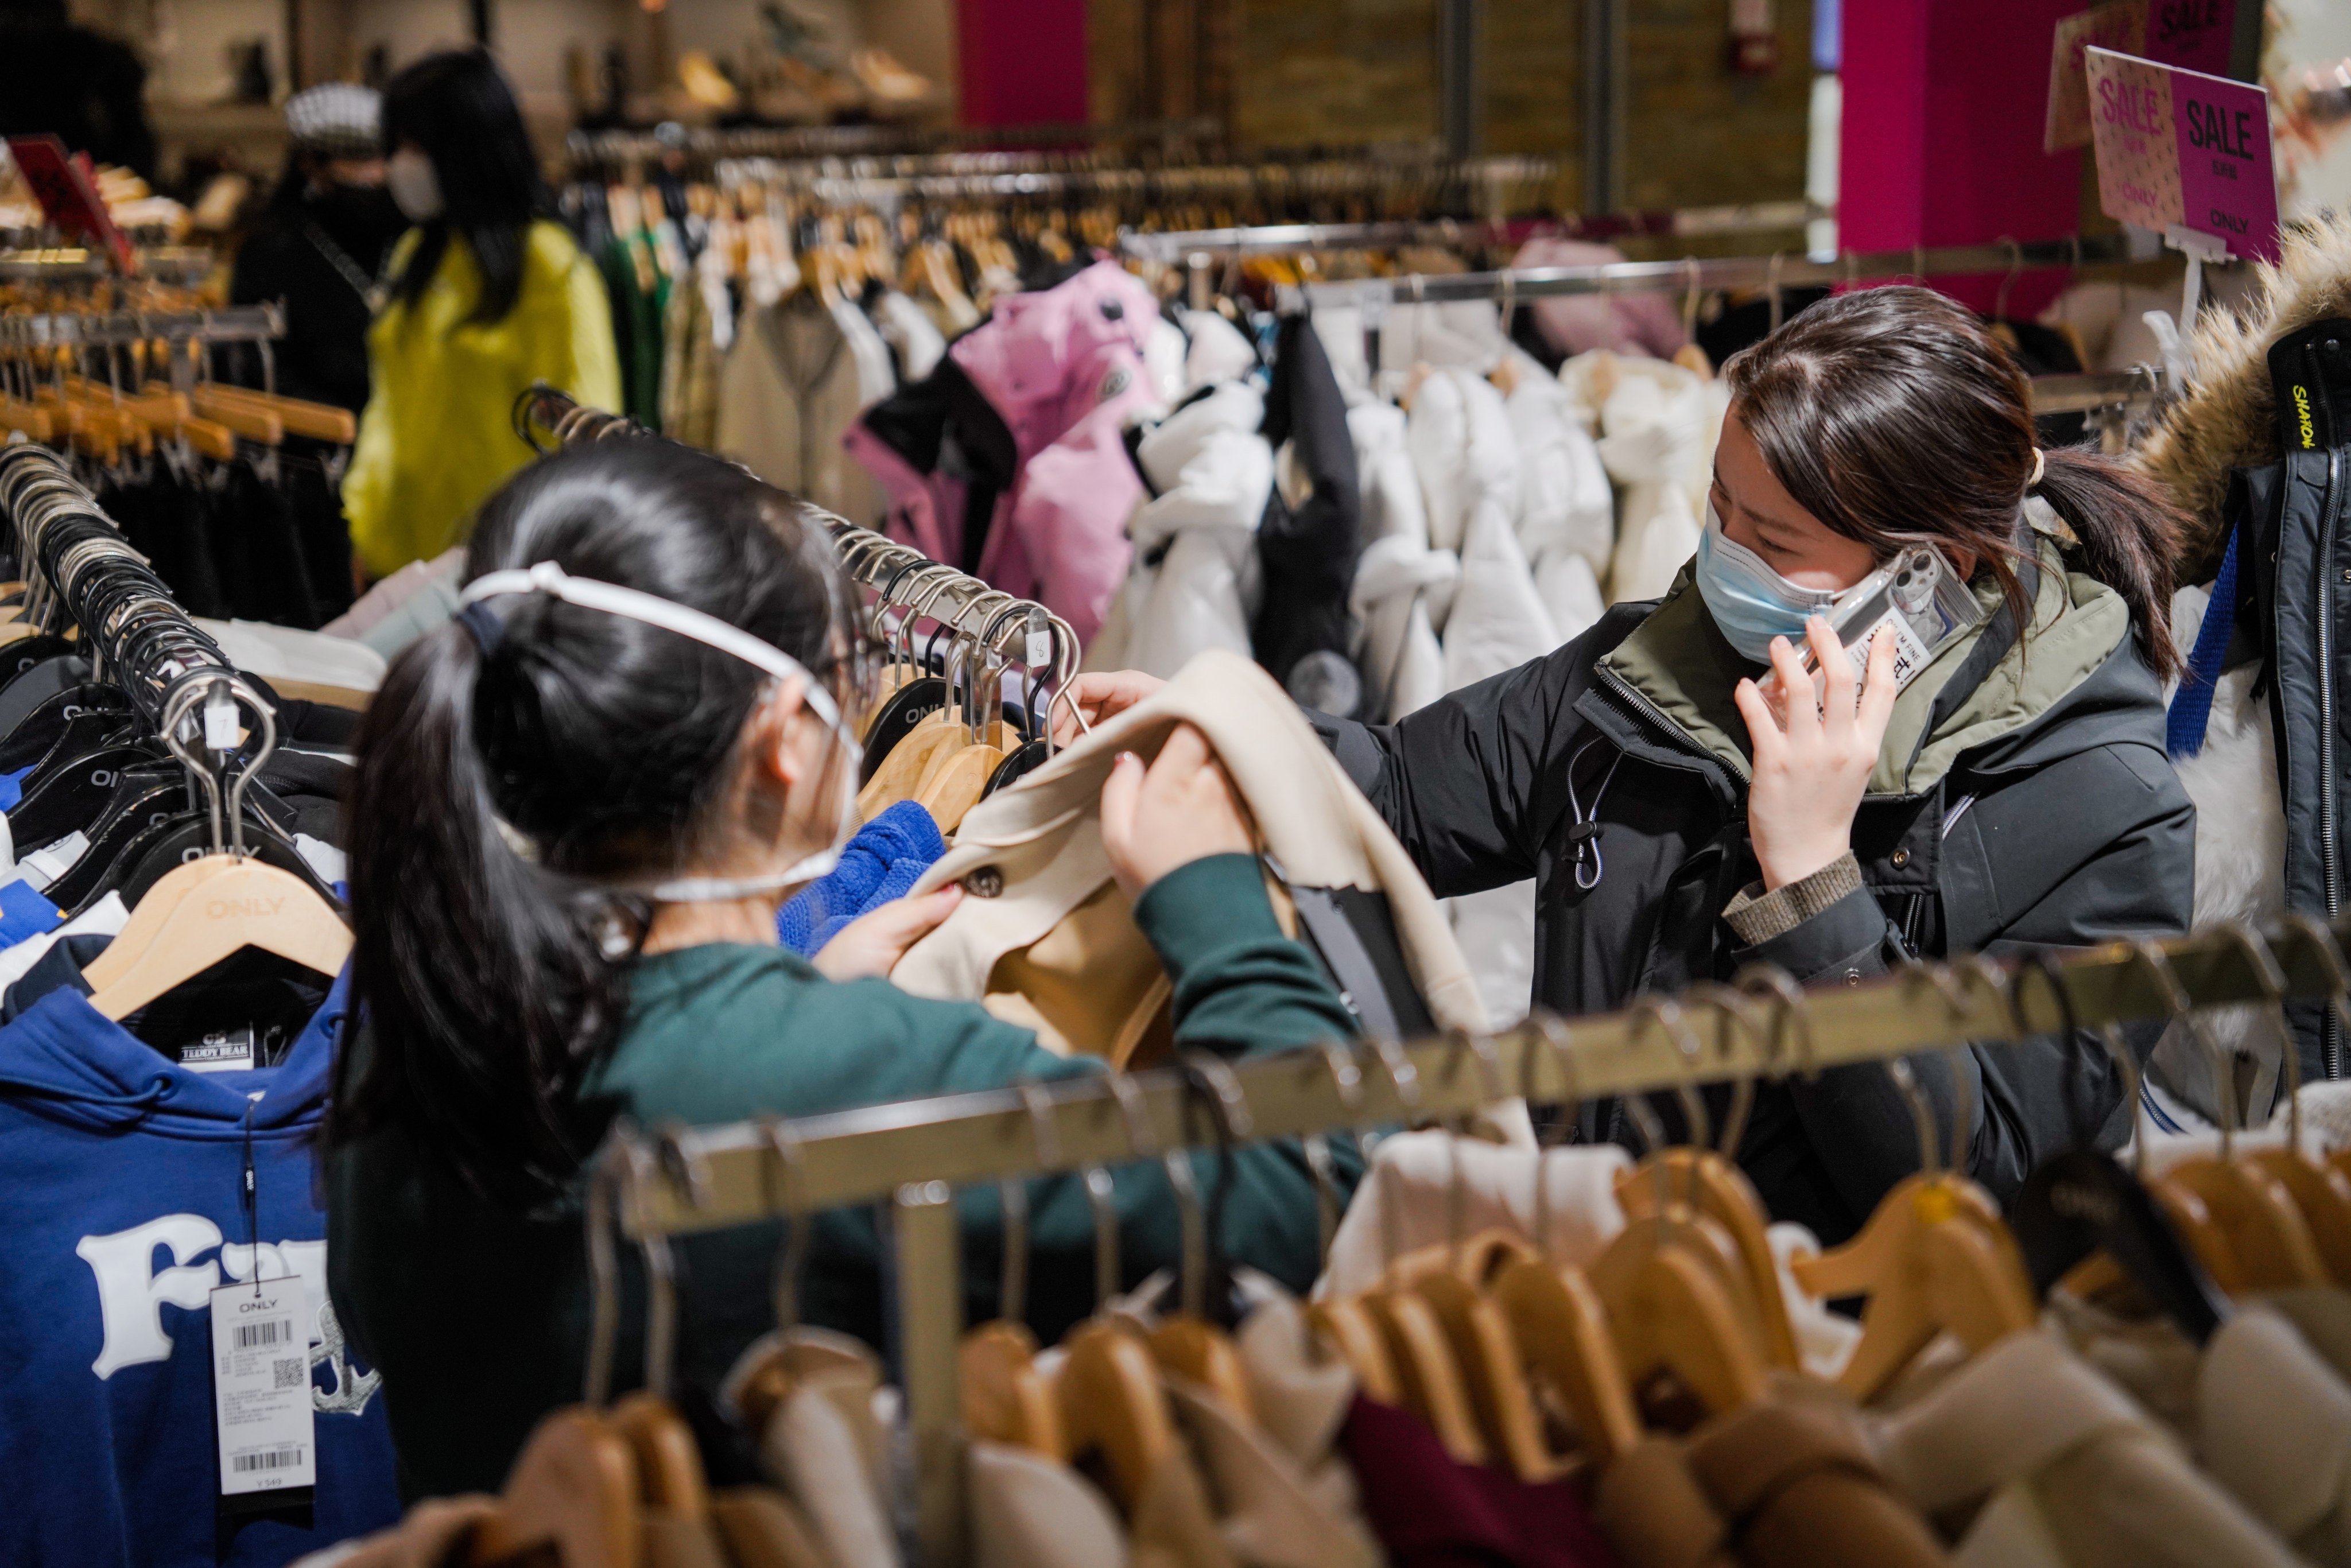 People choose clothes at Joy City shopping centre in Beijing on January 31. There are fears the increase in household savings in China reflects economic uncertainty rather than pent-up demand. Photo: EPA-EFE